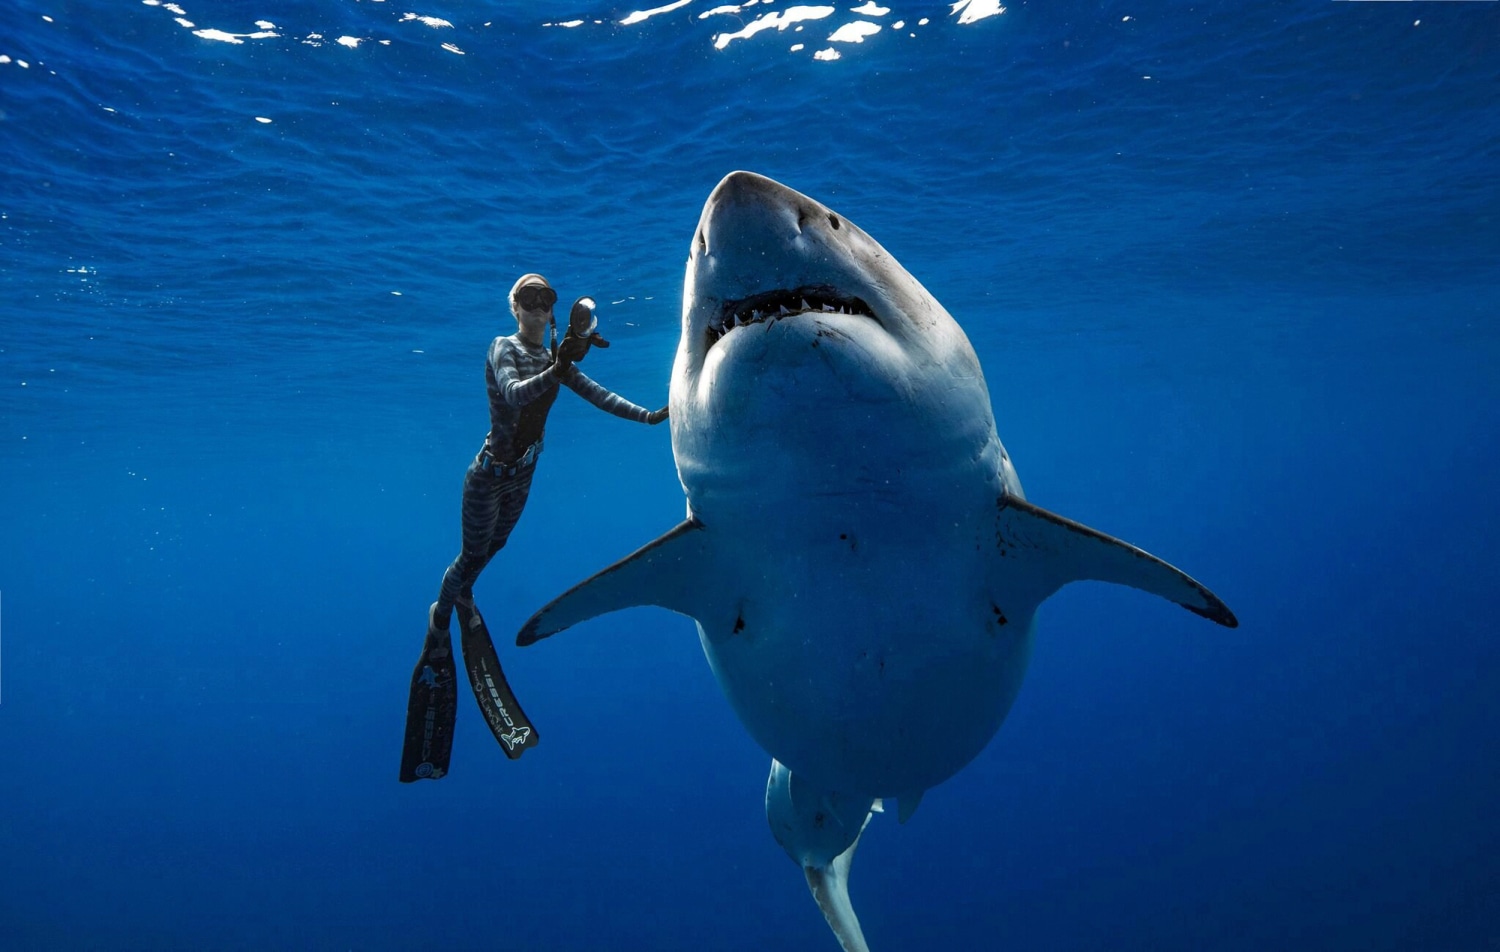 Marine biologist swims with 20 foot long great white shark